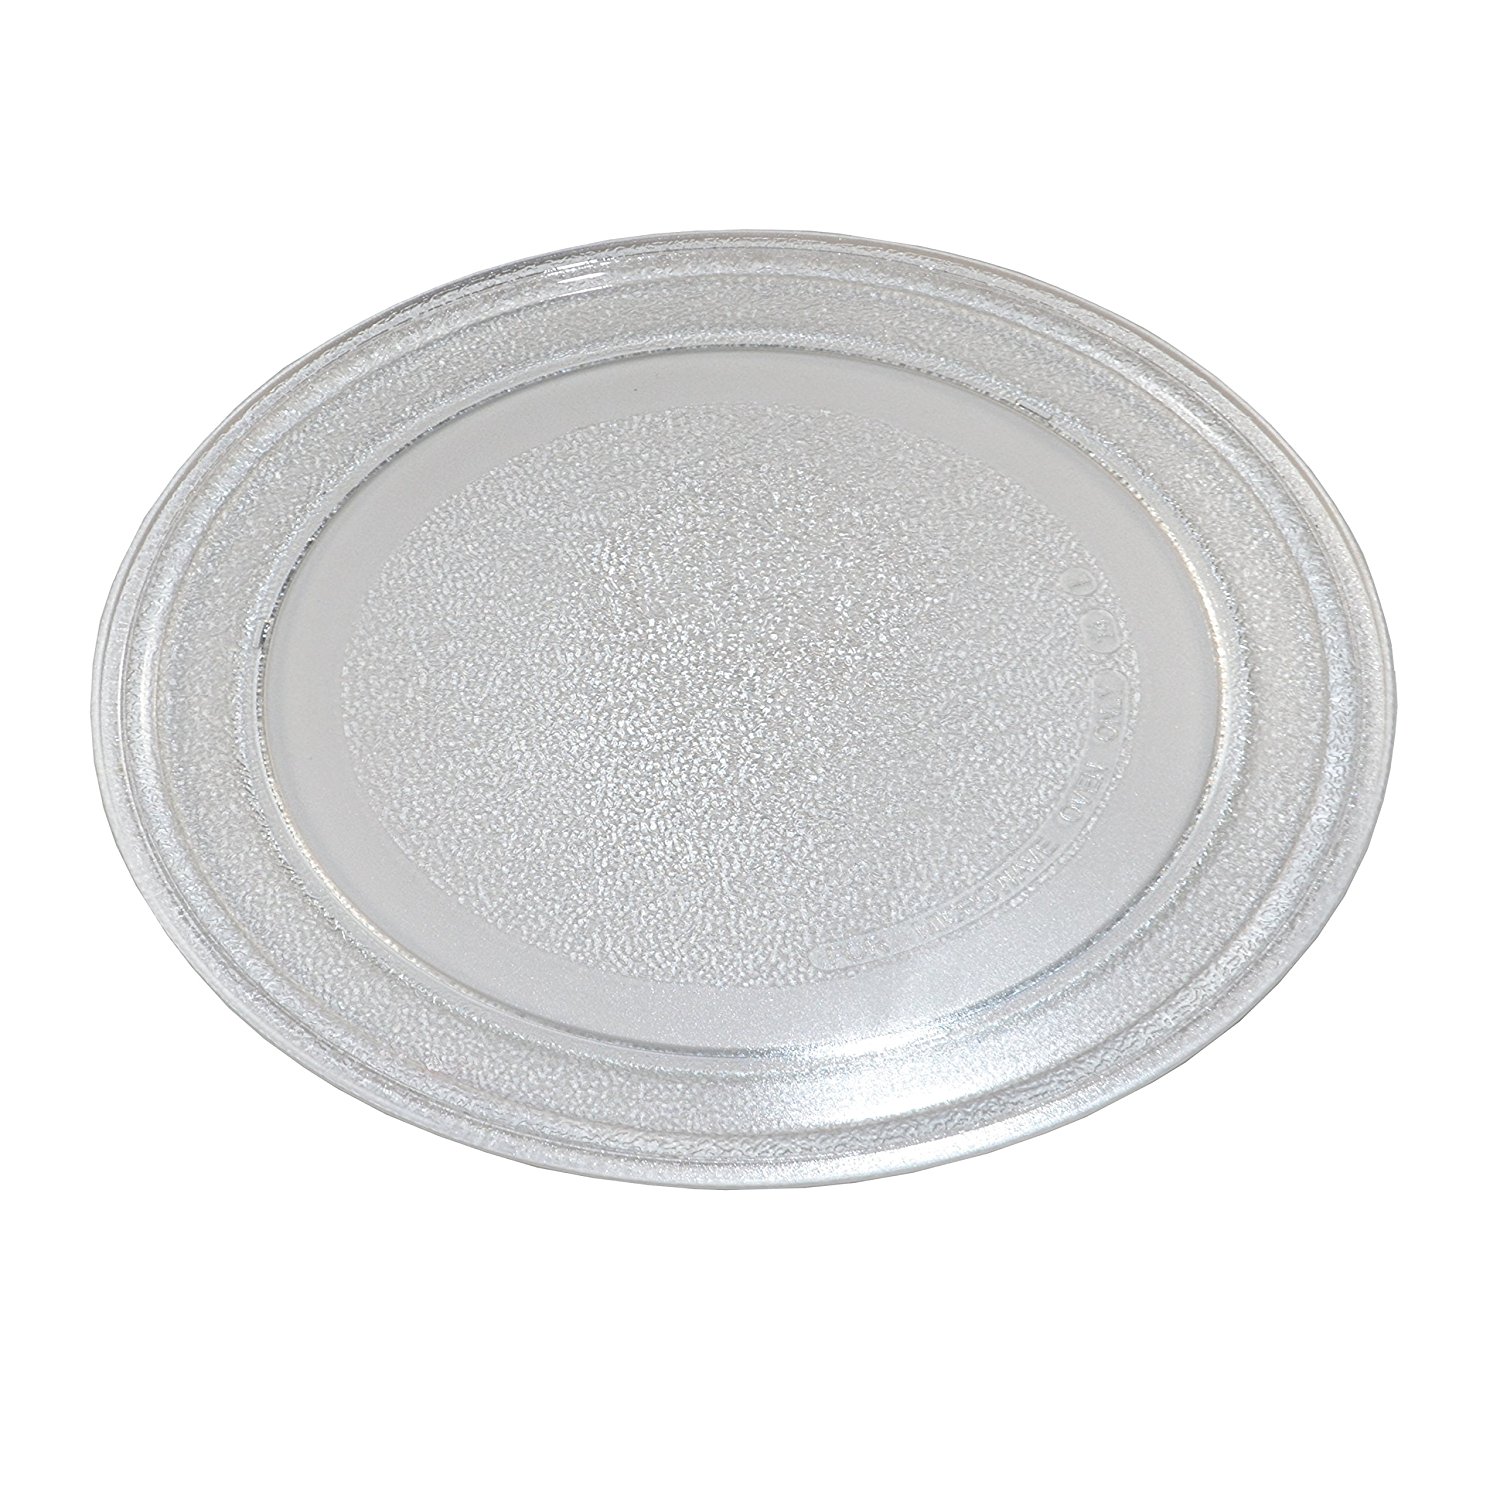 HQRP 9-5/8 inch Glass Turntable Tray for Sunbeam SBM7700B SBM7700W SGDJ701 SGS90701B01 SMO7O1A7E SM07O1A7E SMO701A7E 3390W1A035